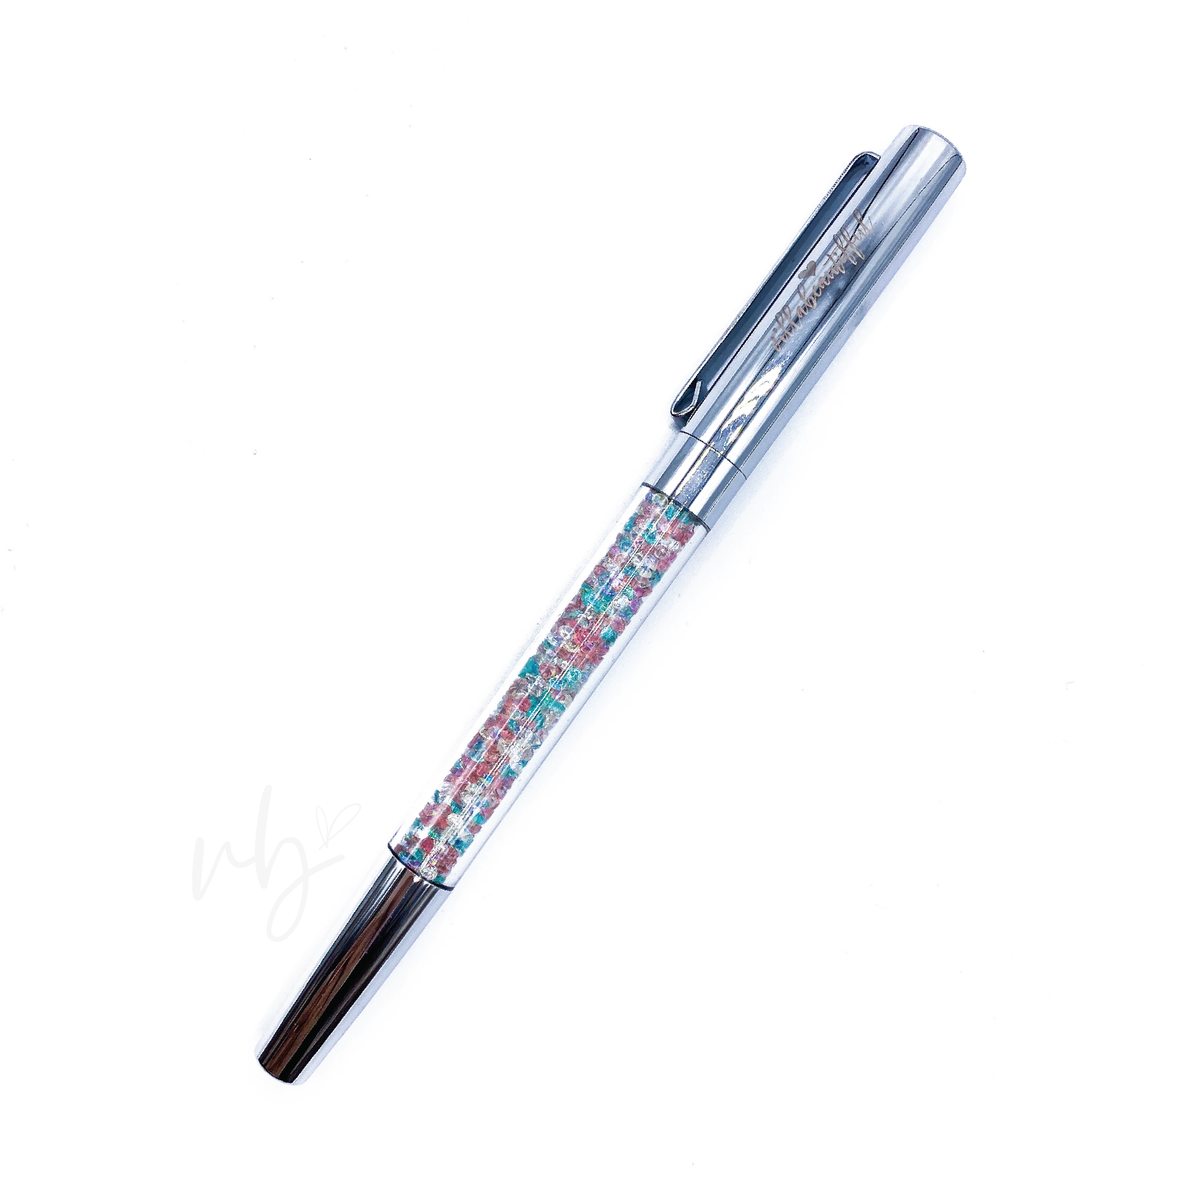 Candy Skies Imperfect Crystal VBPen | limited